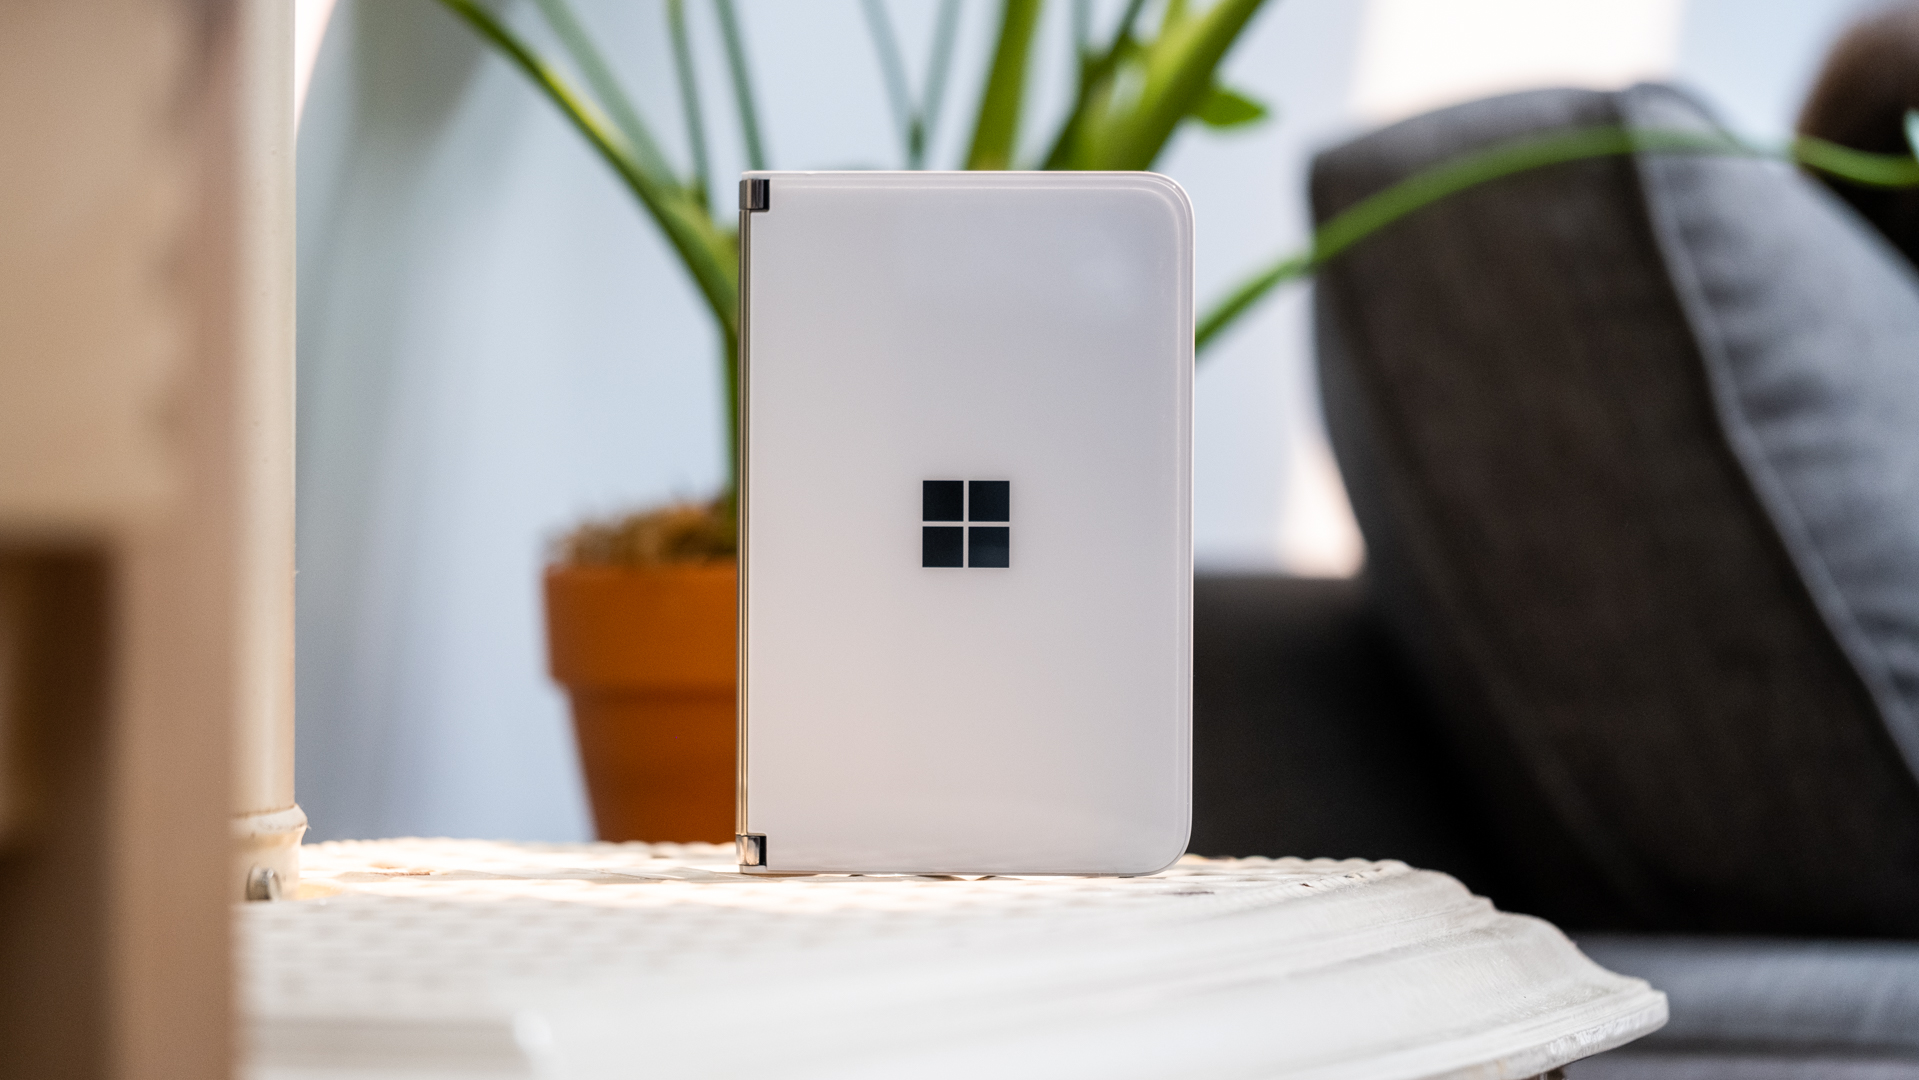 Microsoft Surface Duo standing upright